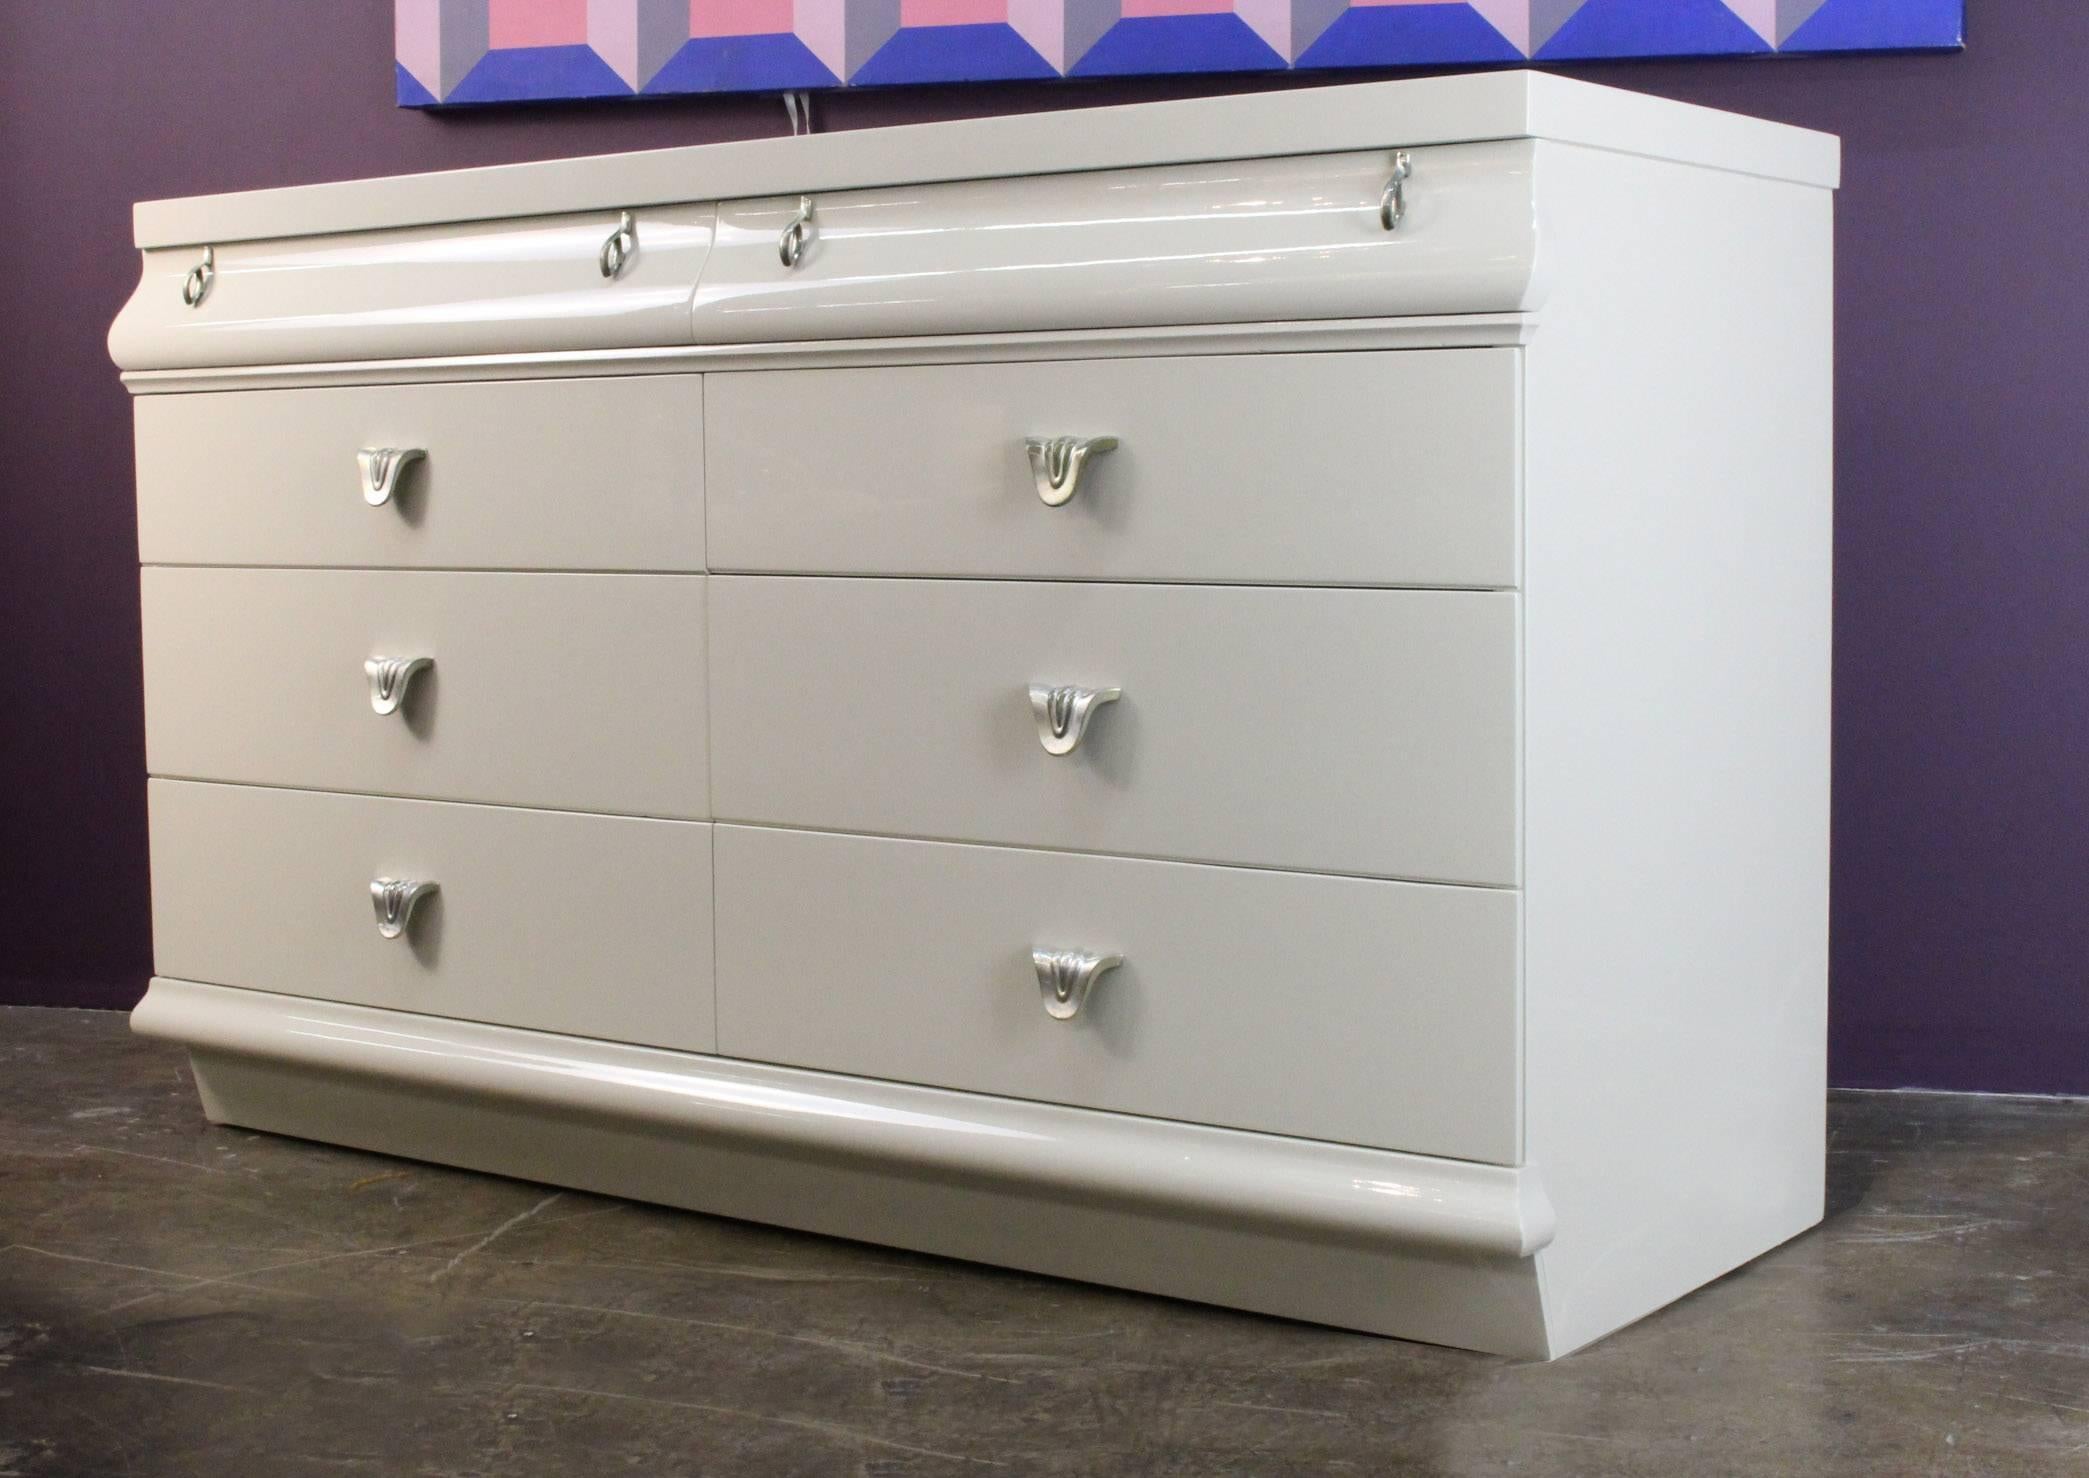 This chic dresser with great form is perfect for a small apartment or would go equally well in a baby room, this dresser has lovely proportions. The dresser has also been professionally lacquered.